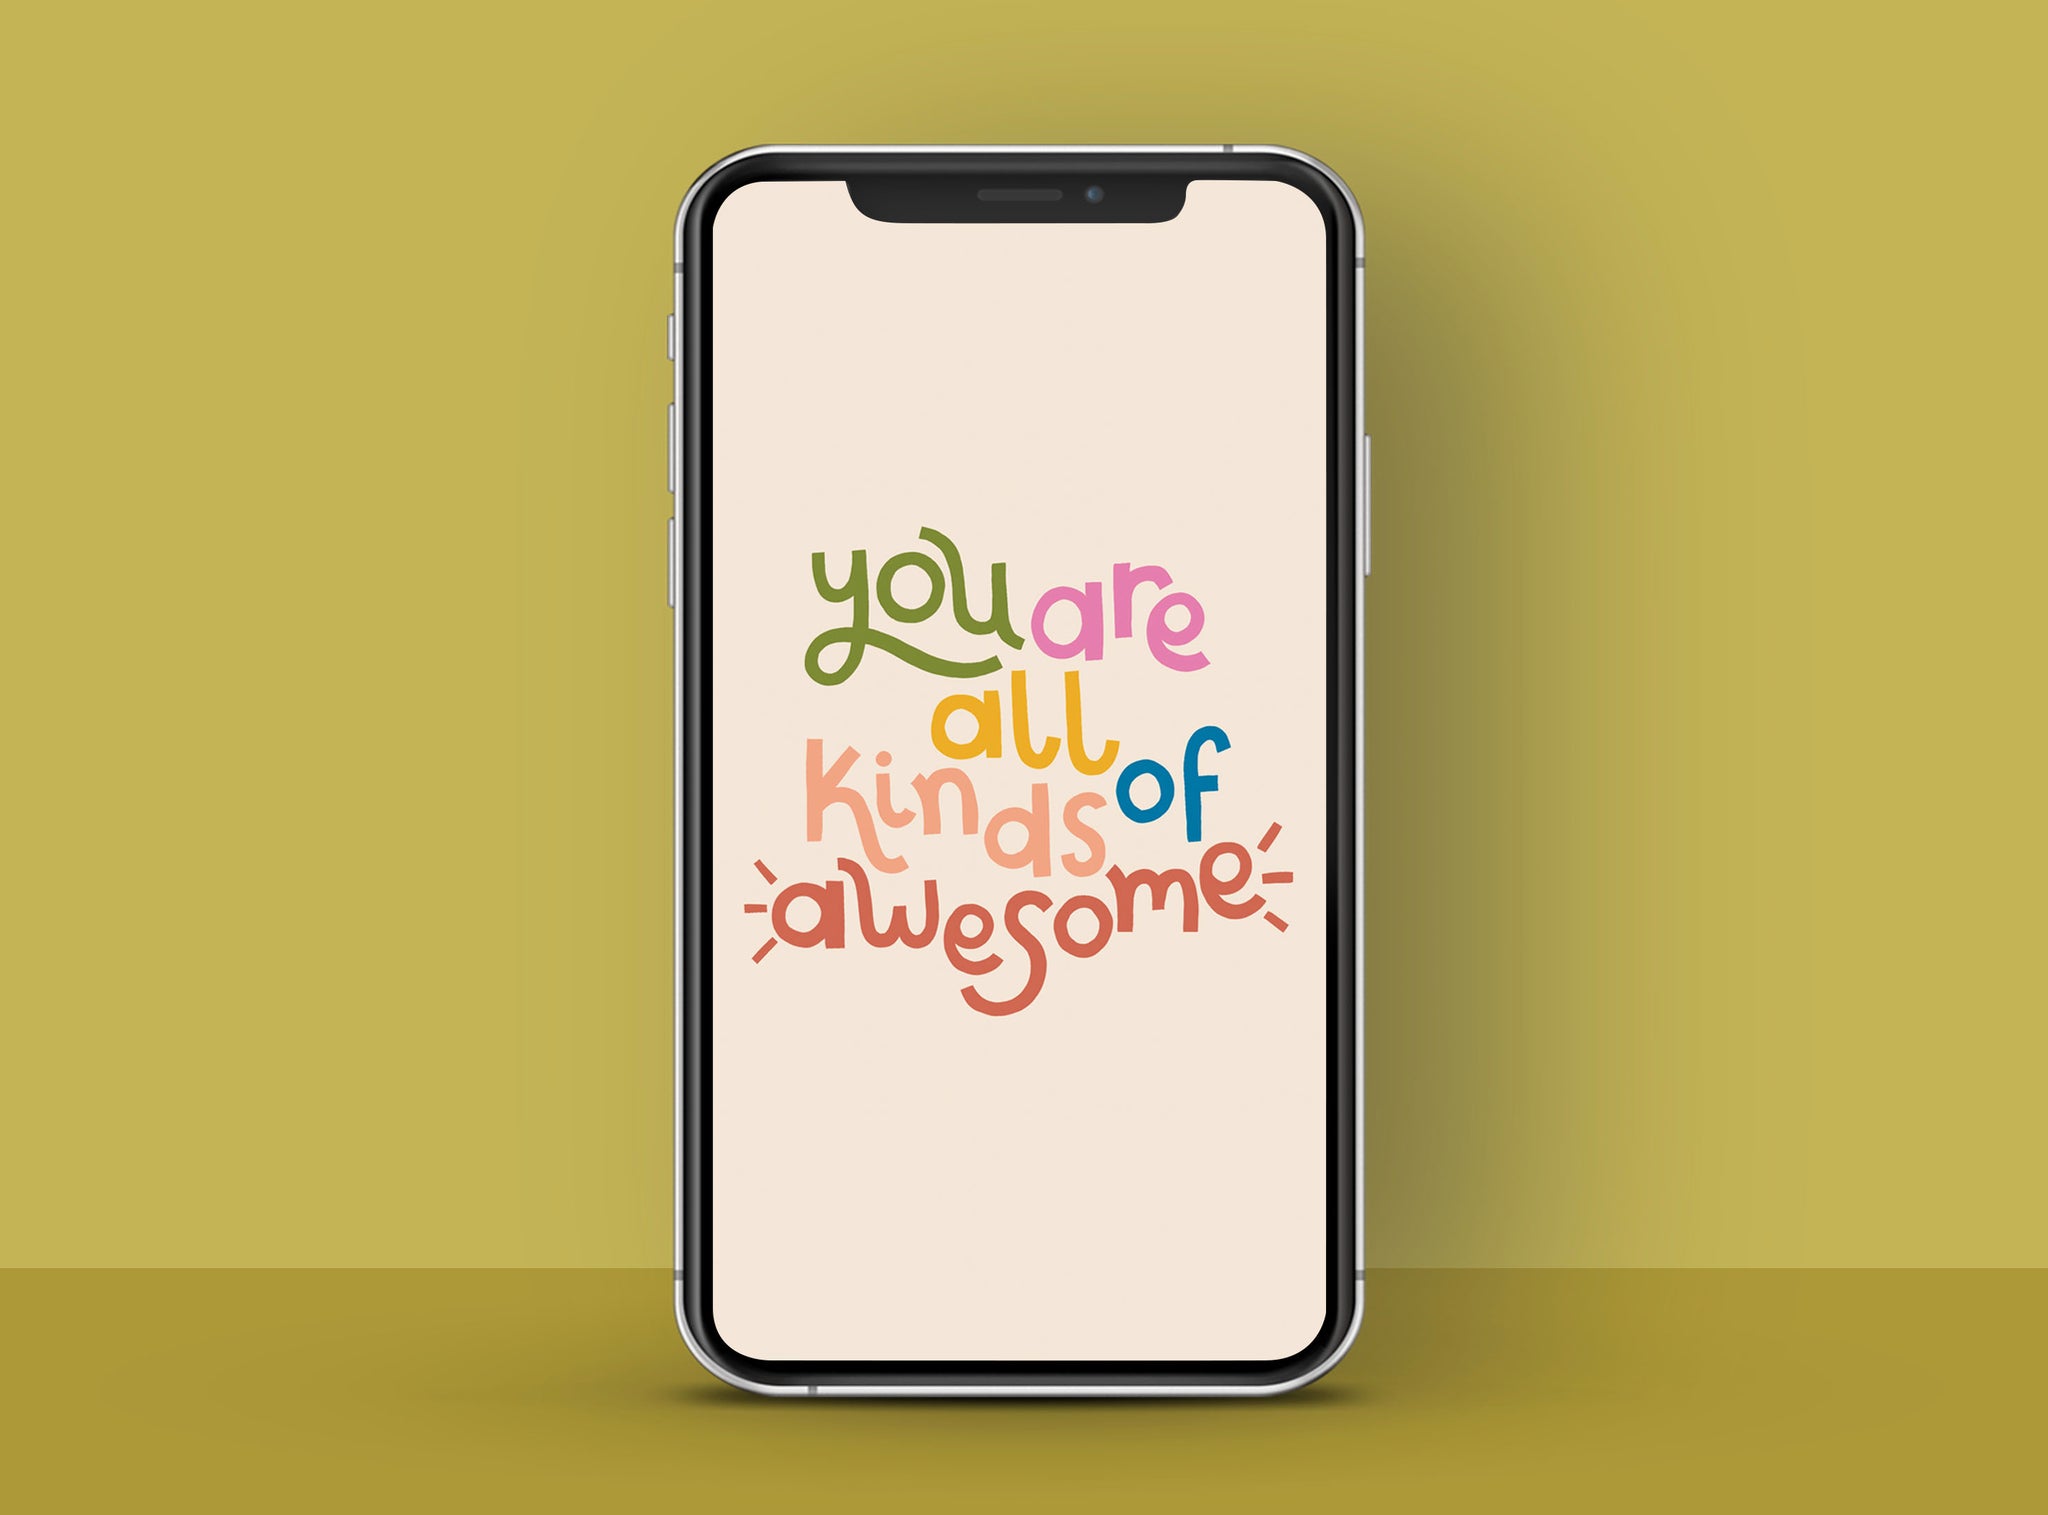 'You are all kinds of awesome' Positive message phone wallpaper | Raspberry Blossom